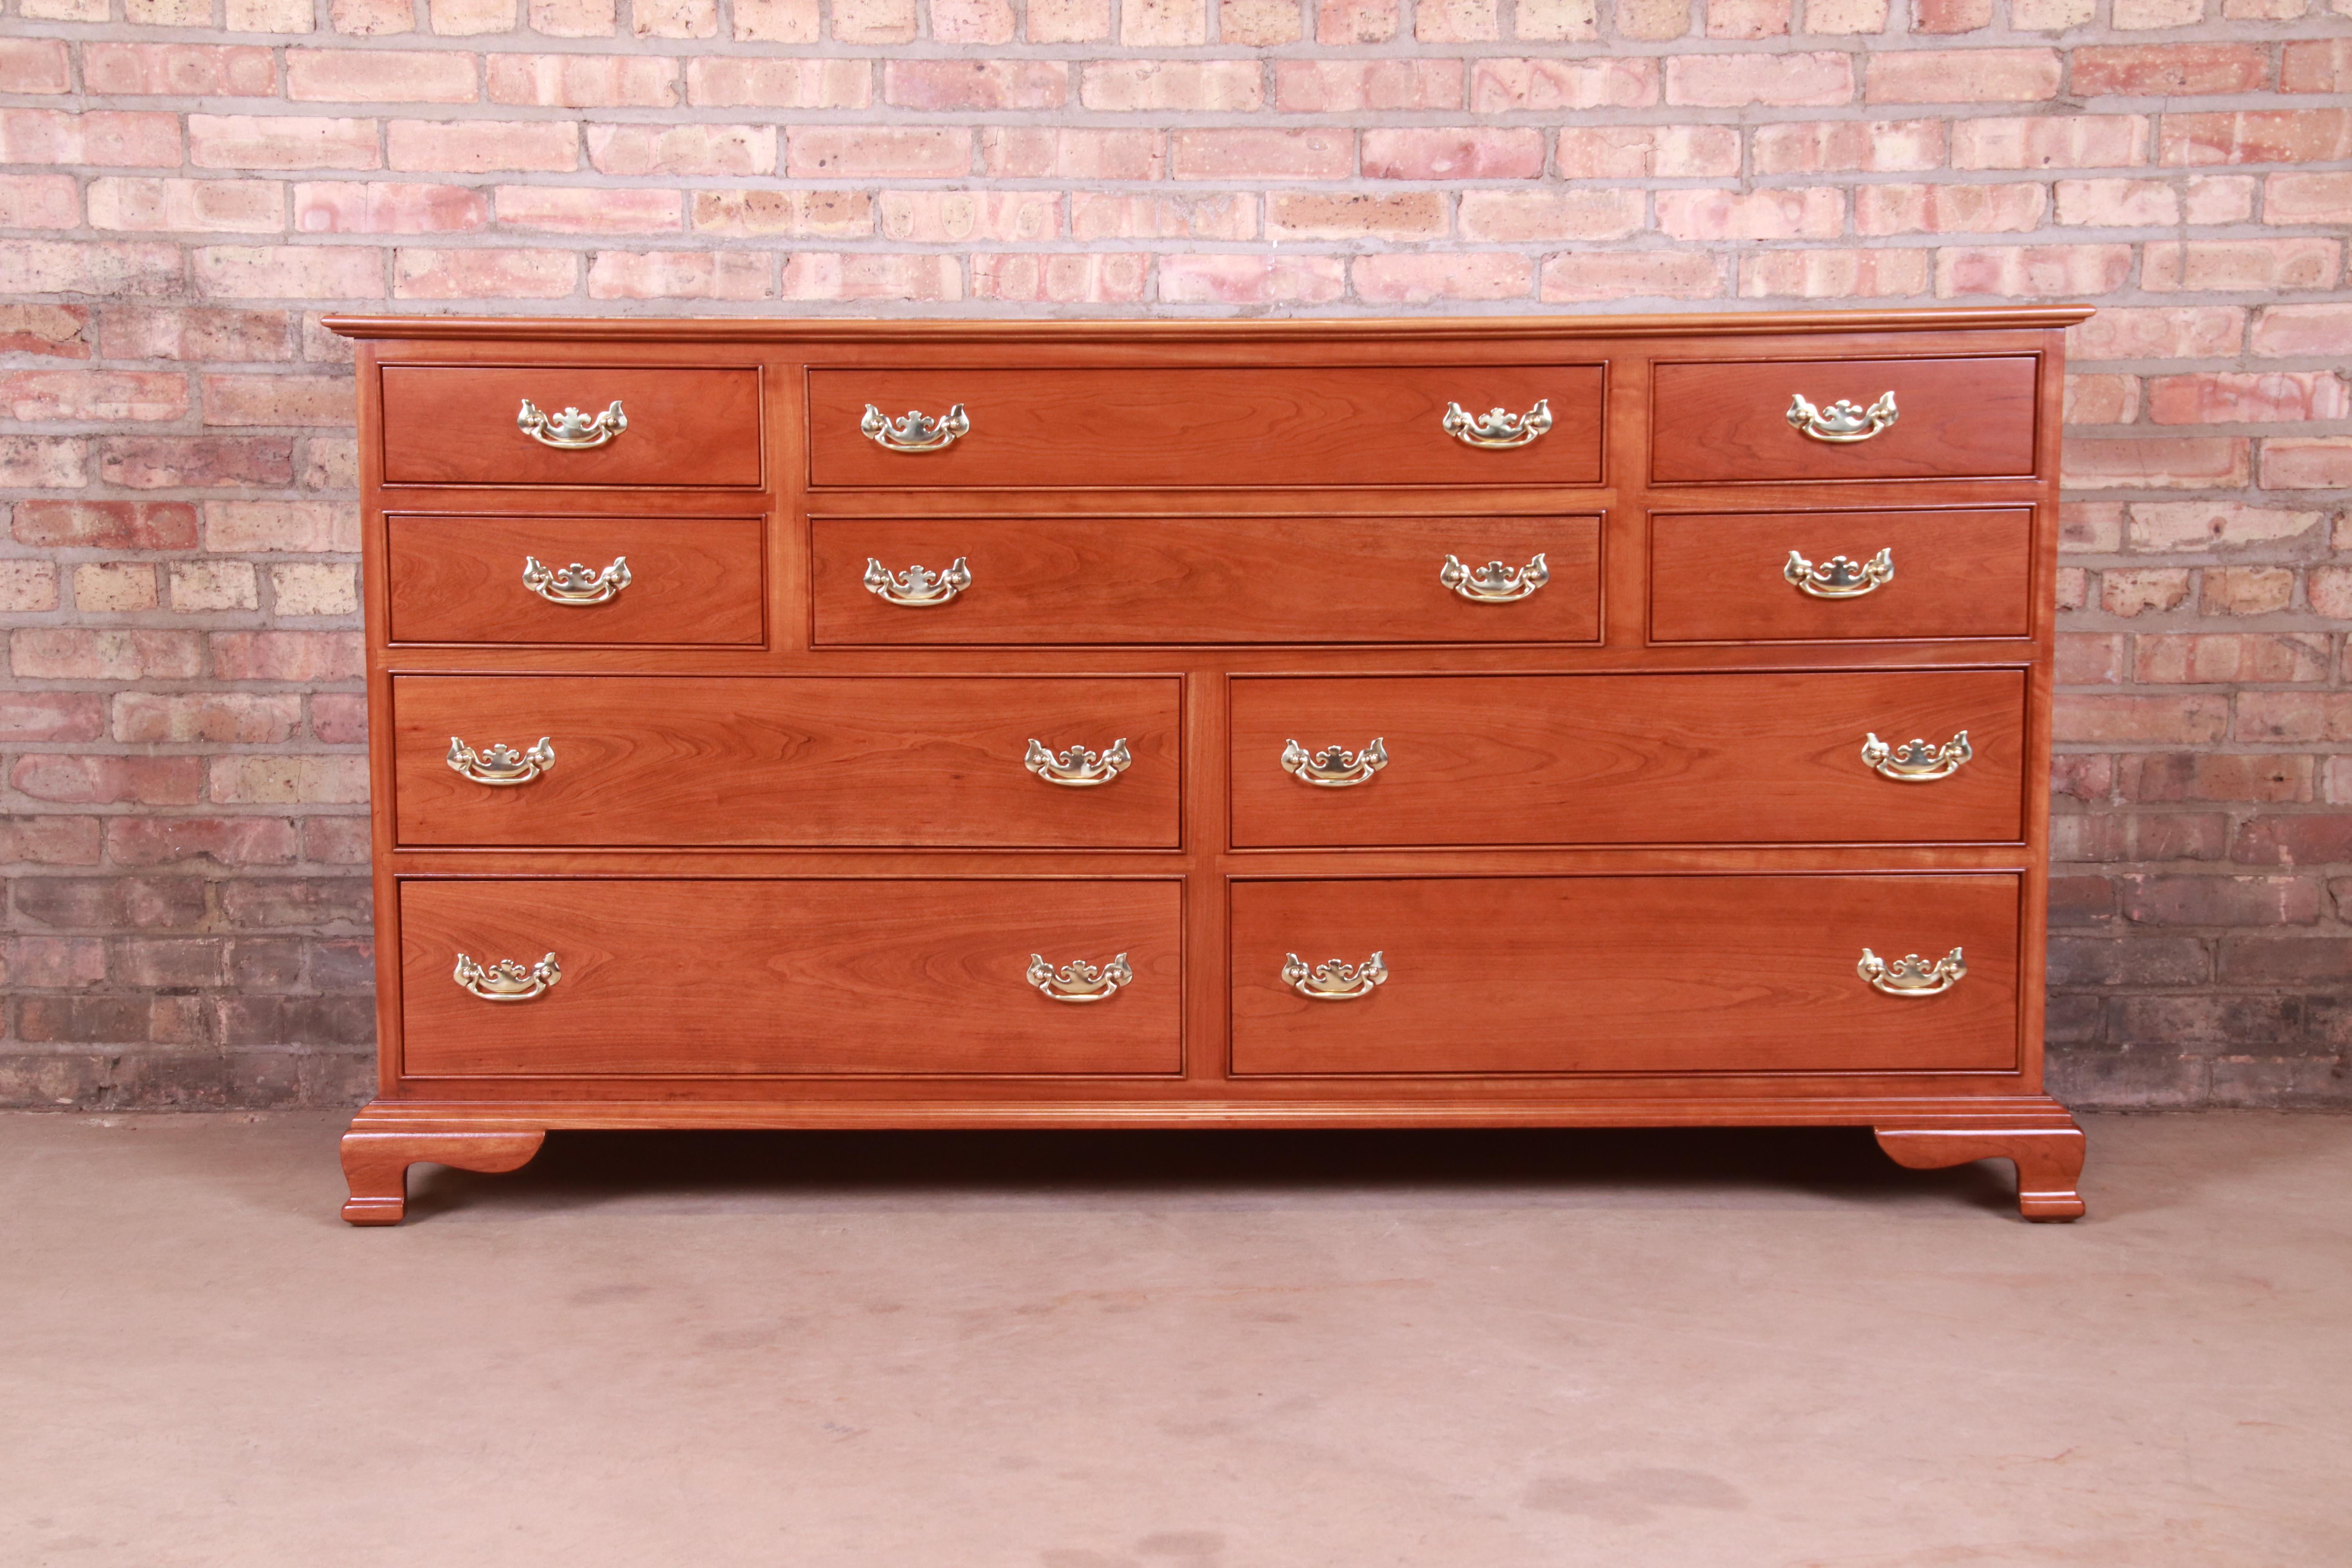 A gorgeous American Colonial style ten-drawer dresser or credenza

By L. & J.G. Stickley

USA, Circa 1950s

Solid cherry wood, withe original brass hardware.

Measures: 66